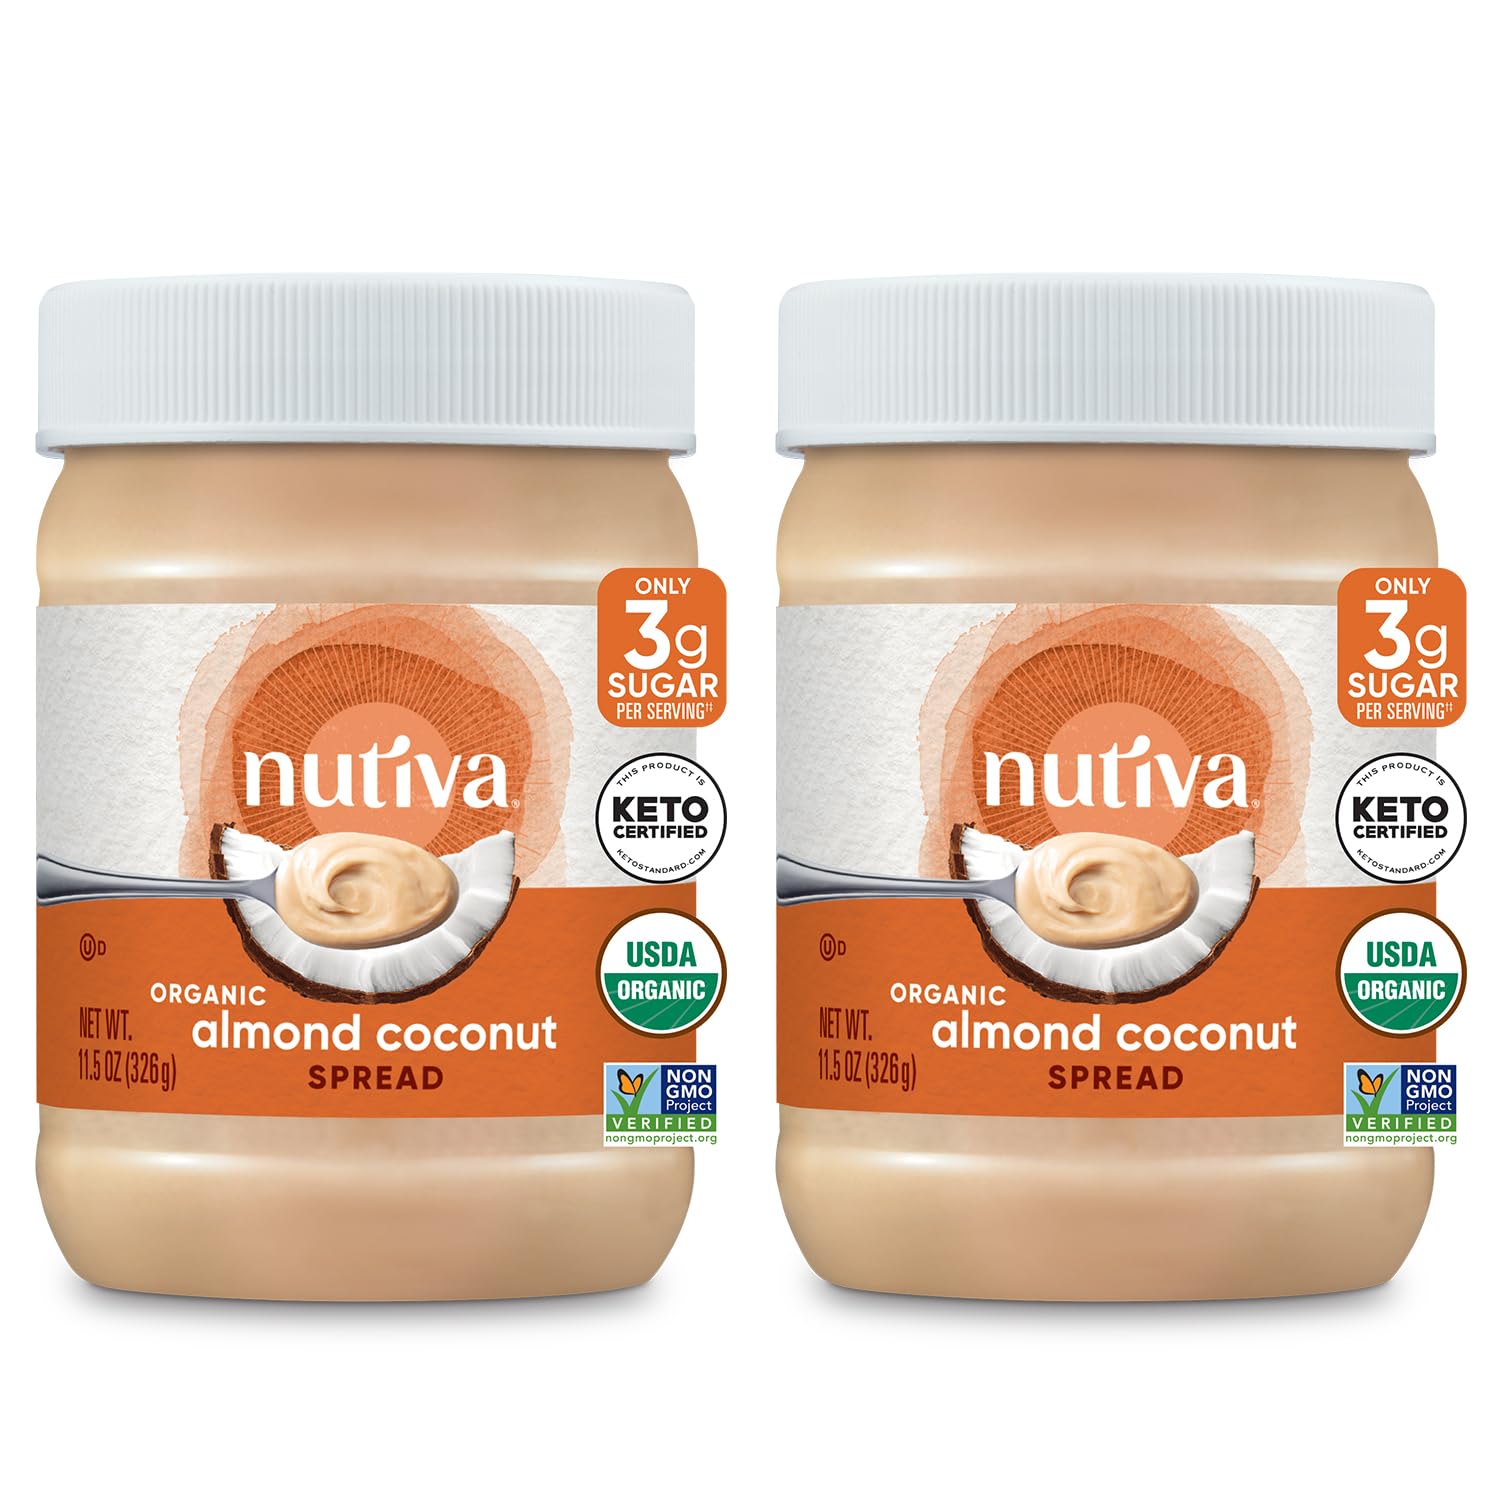 2-Pack 11.5-Oz Nutiva Organic Almond Coconut Spread $4.56 ($2.28 each) + Free Shipping w/ Prime or on $35+